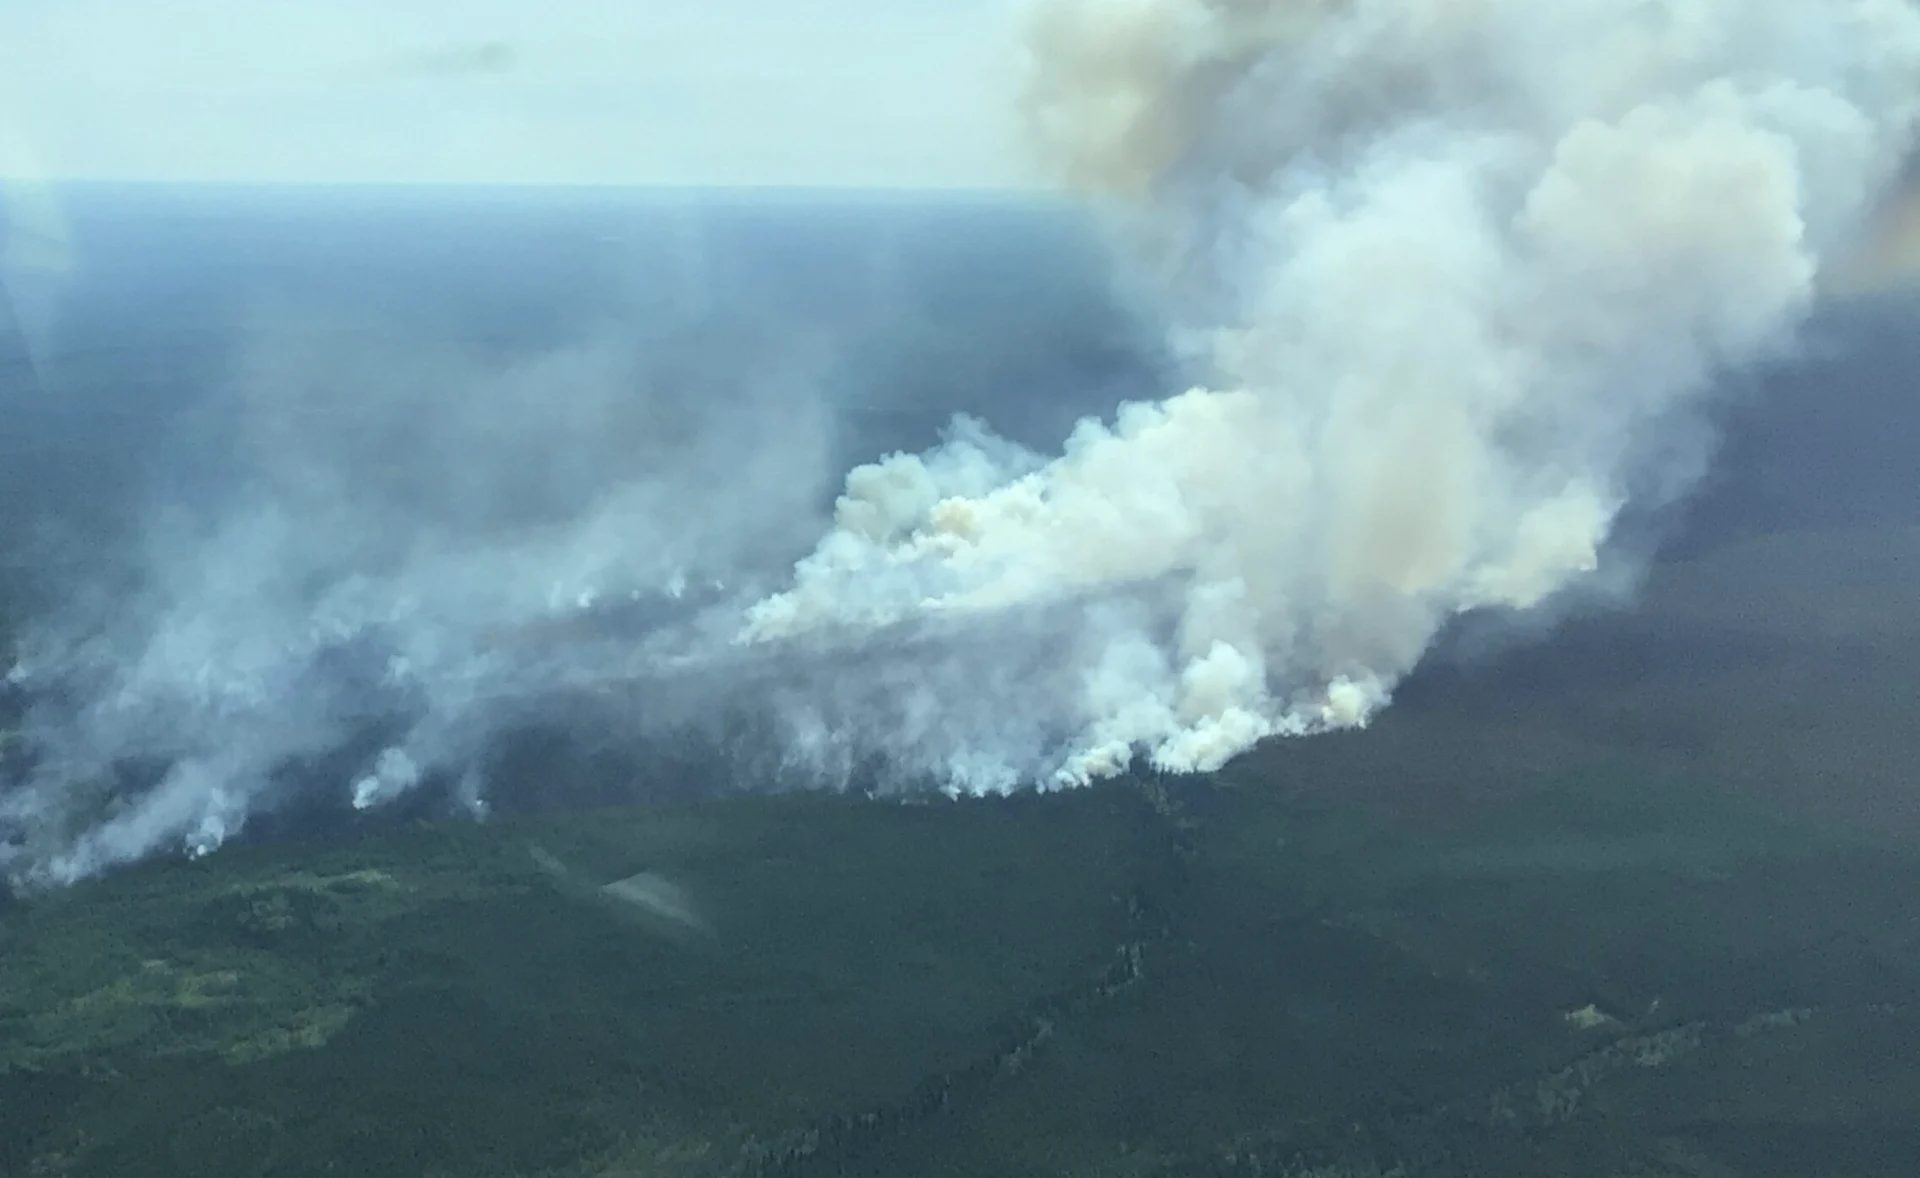 Wildfire burns out of control near Suncor's Firebag oil sands site in Alberta